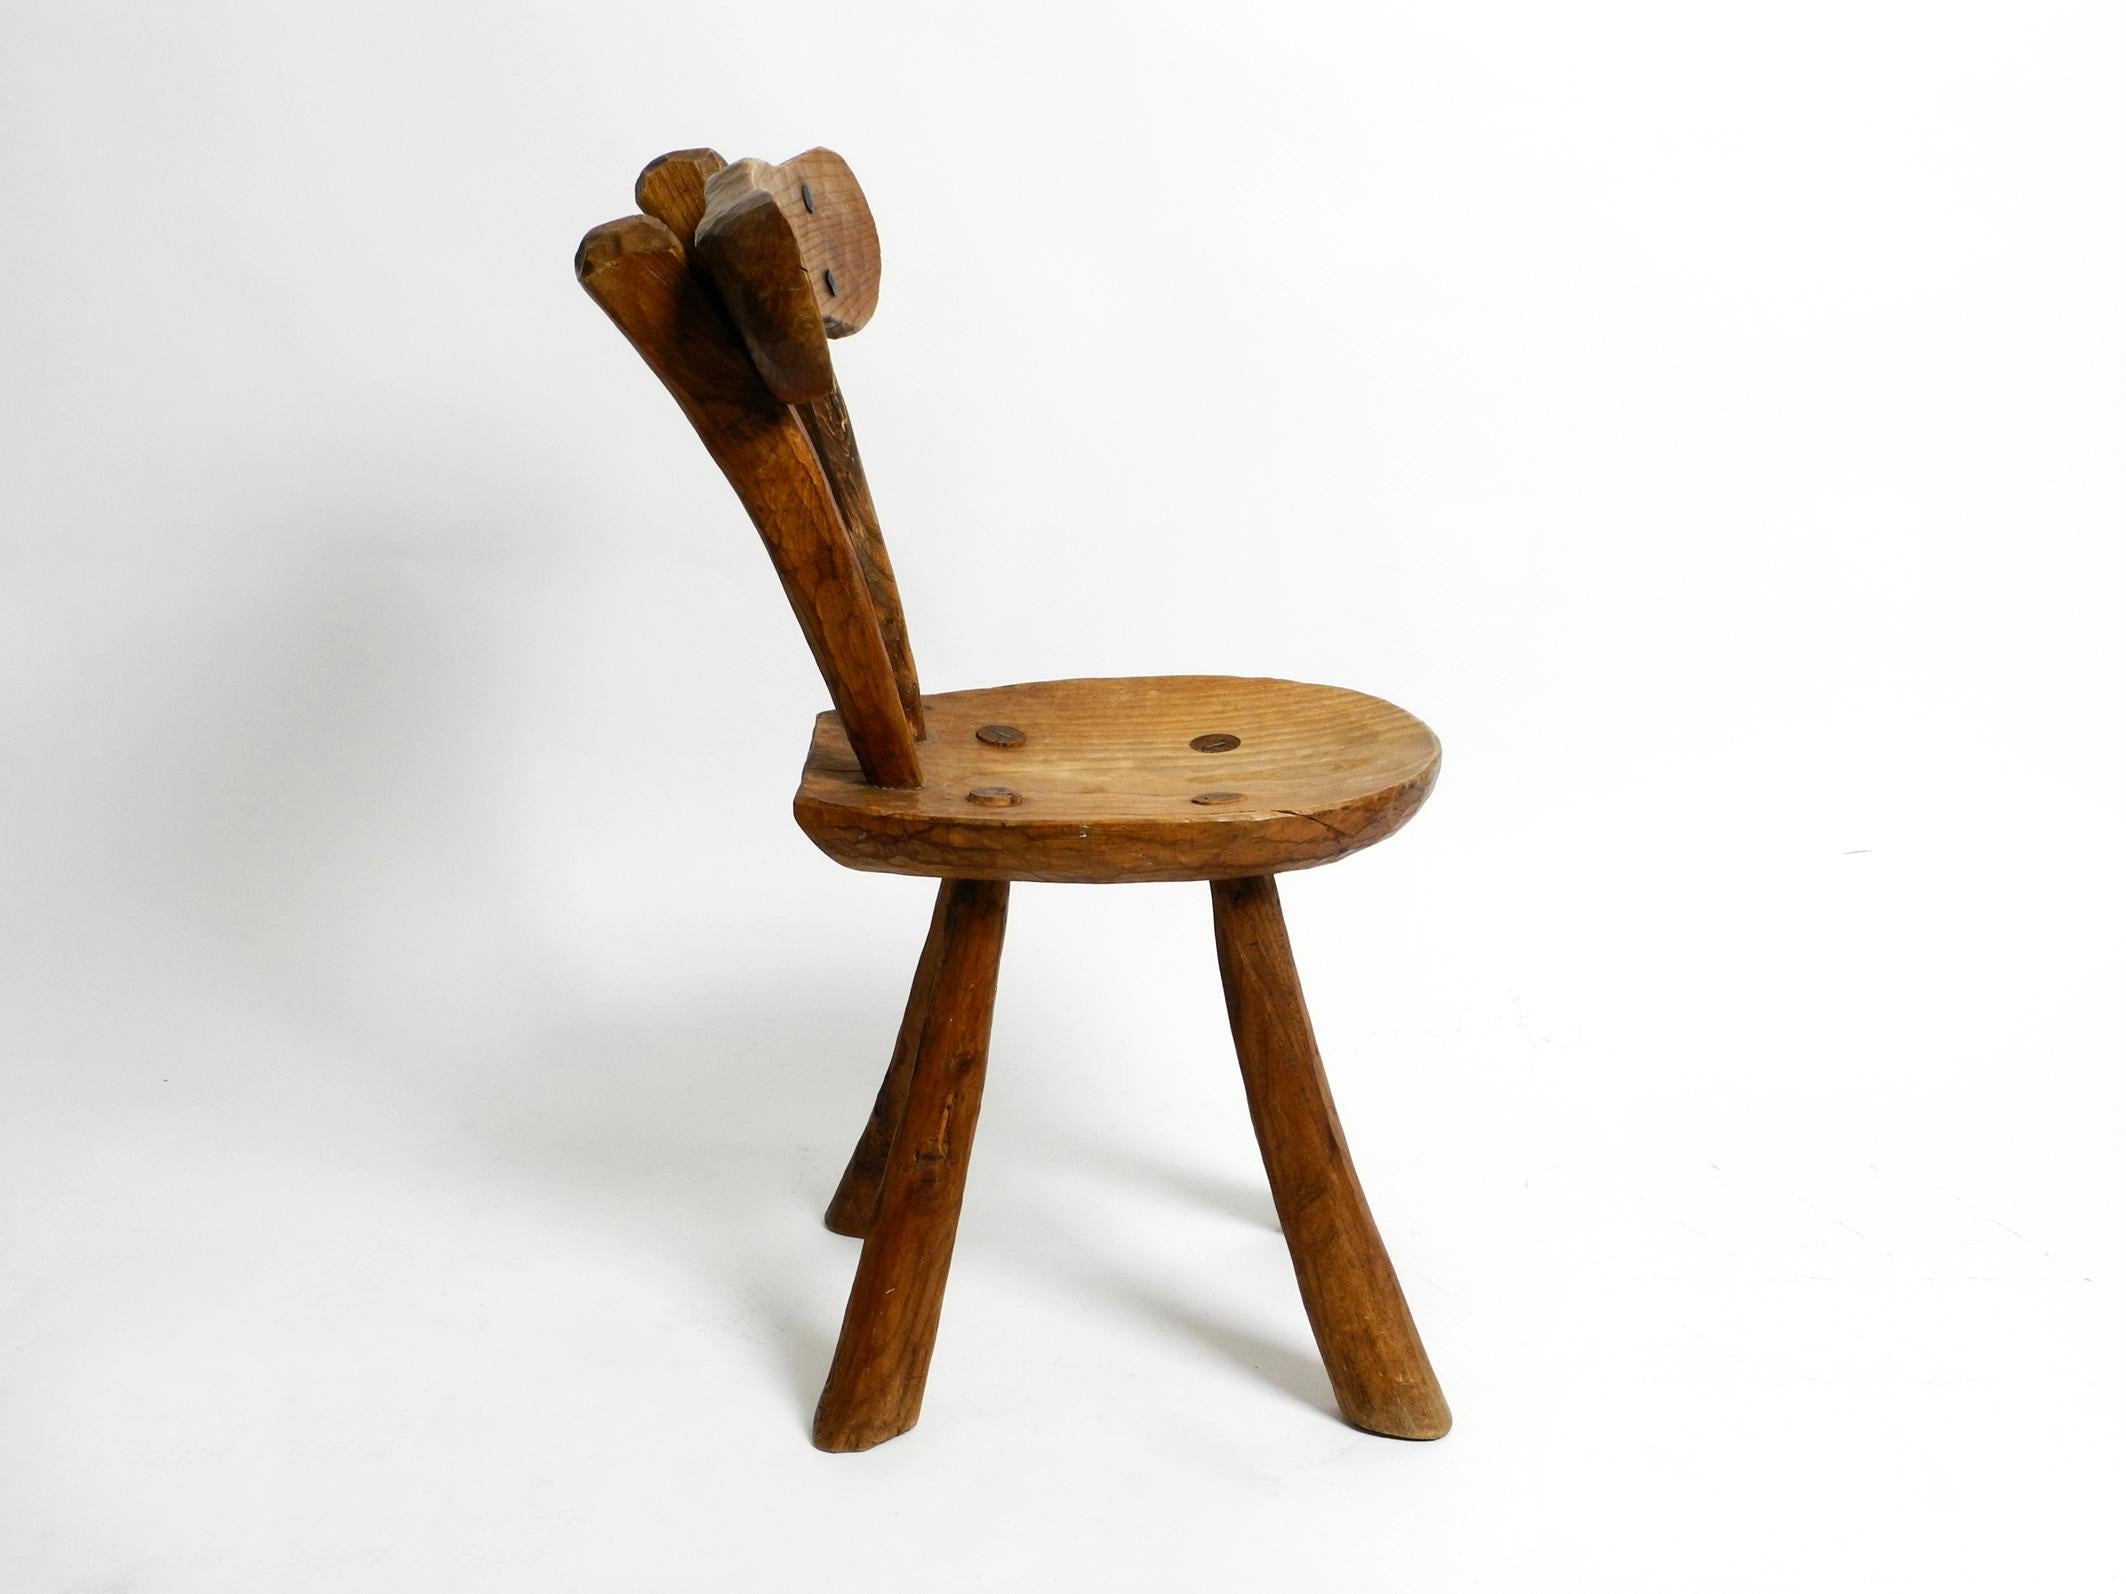 Austrian Beautiful, Very Rare Midcentury Spruce Wood Country Chair from Tyrol Austria